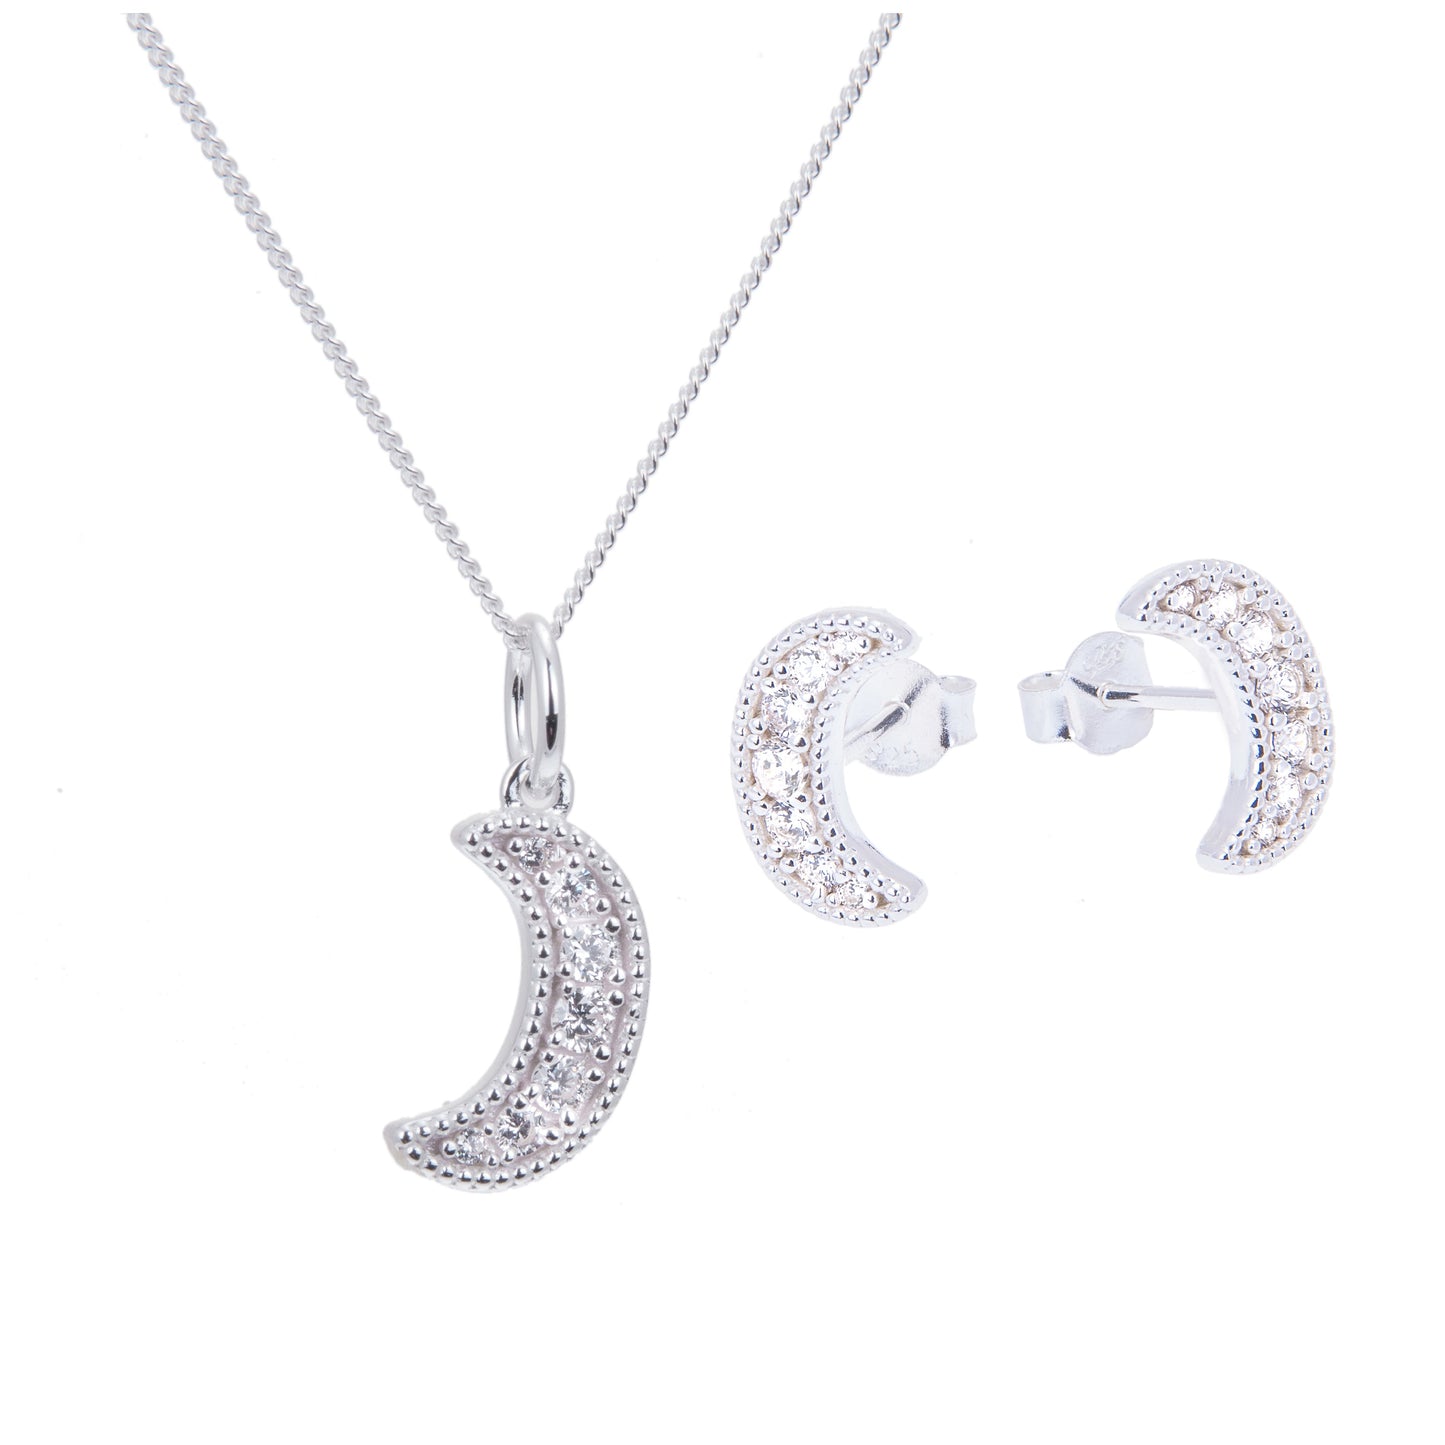 Sterling Silver CZ Crescent Moon Stud Earrings & Necklace Set 14 - 32 Inches